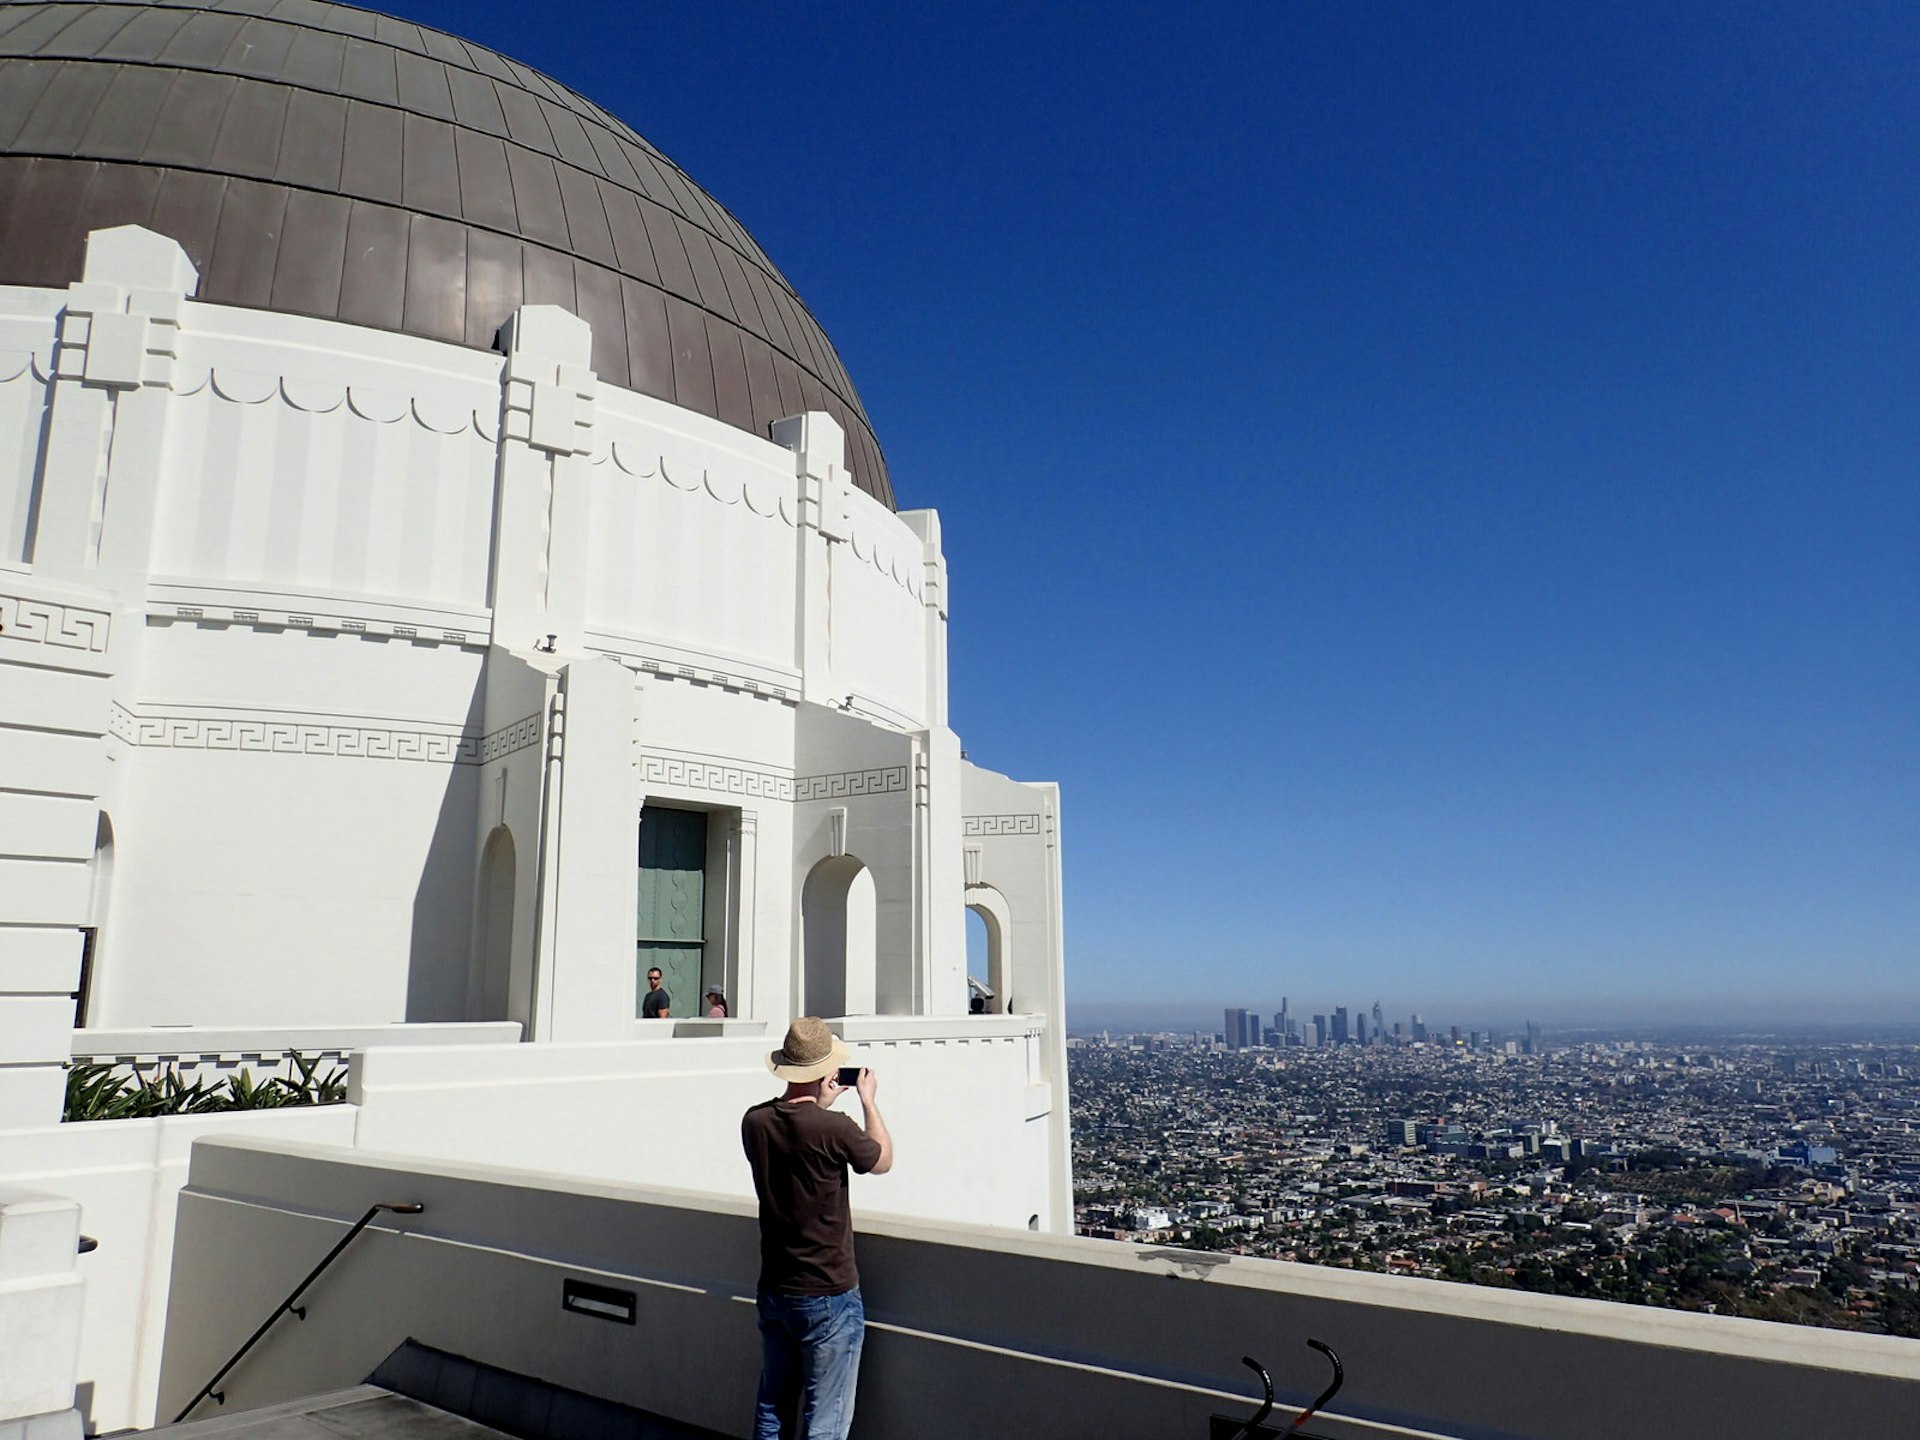 Science and views all in one at Griffith Observatory © Tim Richards / Lonely Planet